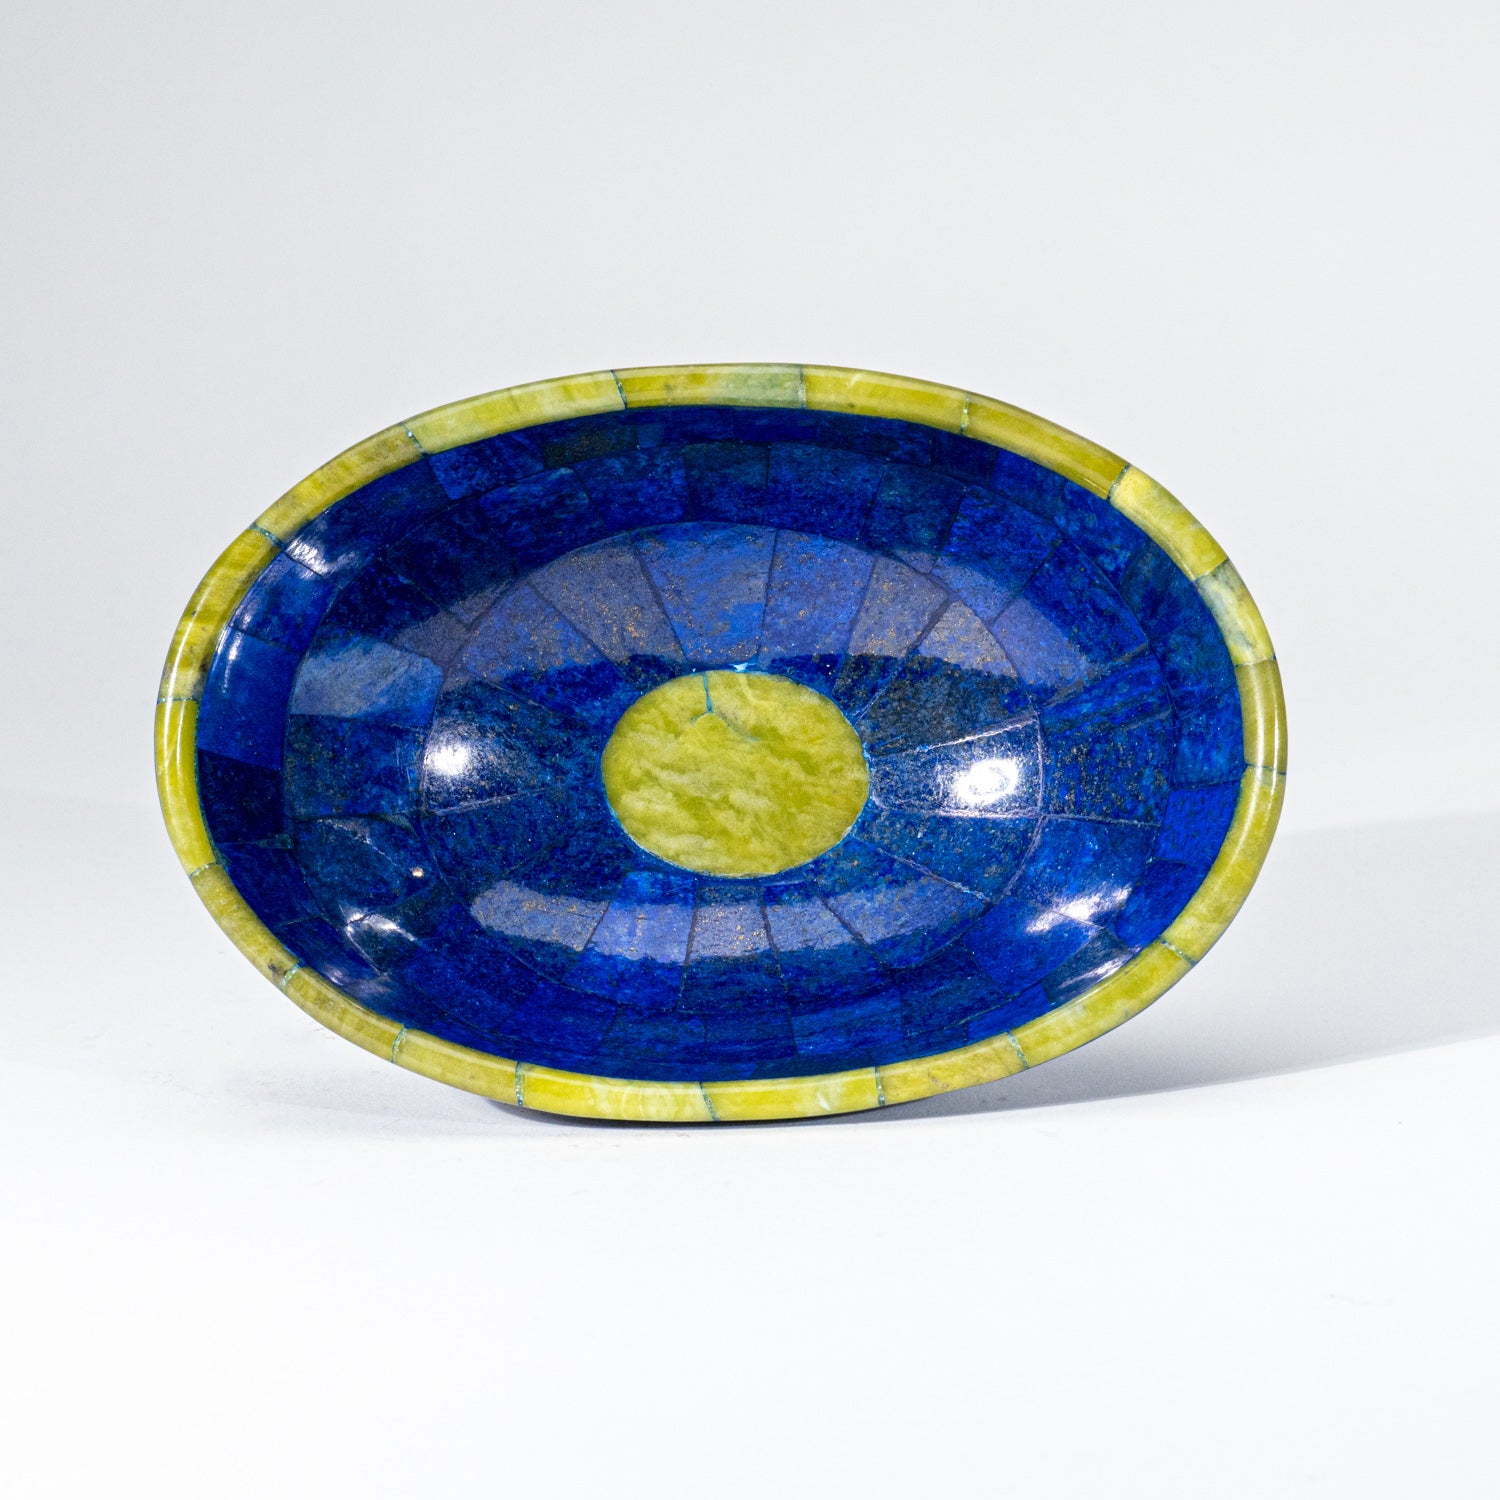 Genuine Polished Lapis Lazuli Oval Bowl With Green Jade Trimming (424.2 grams)